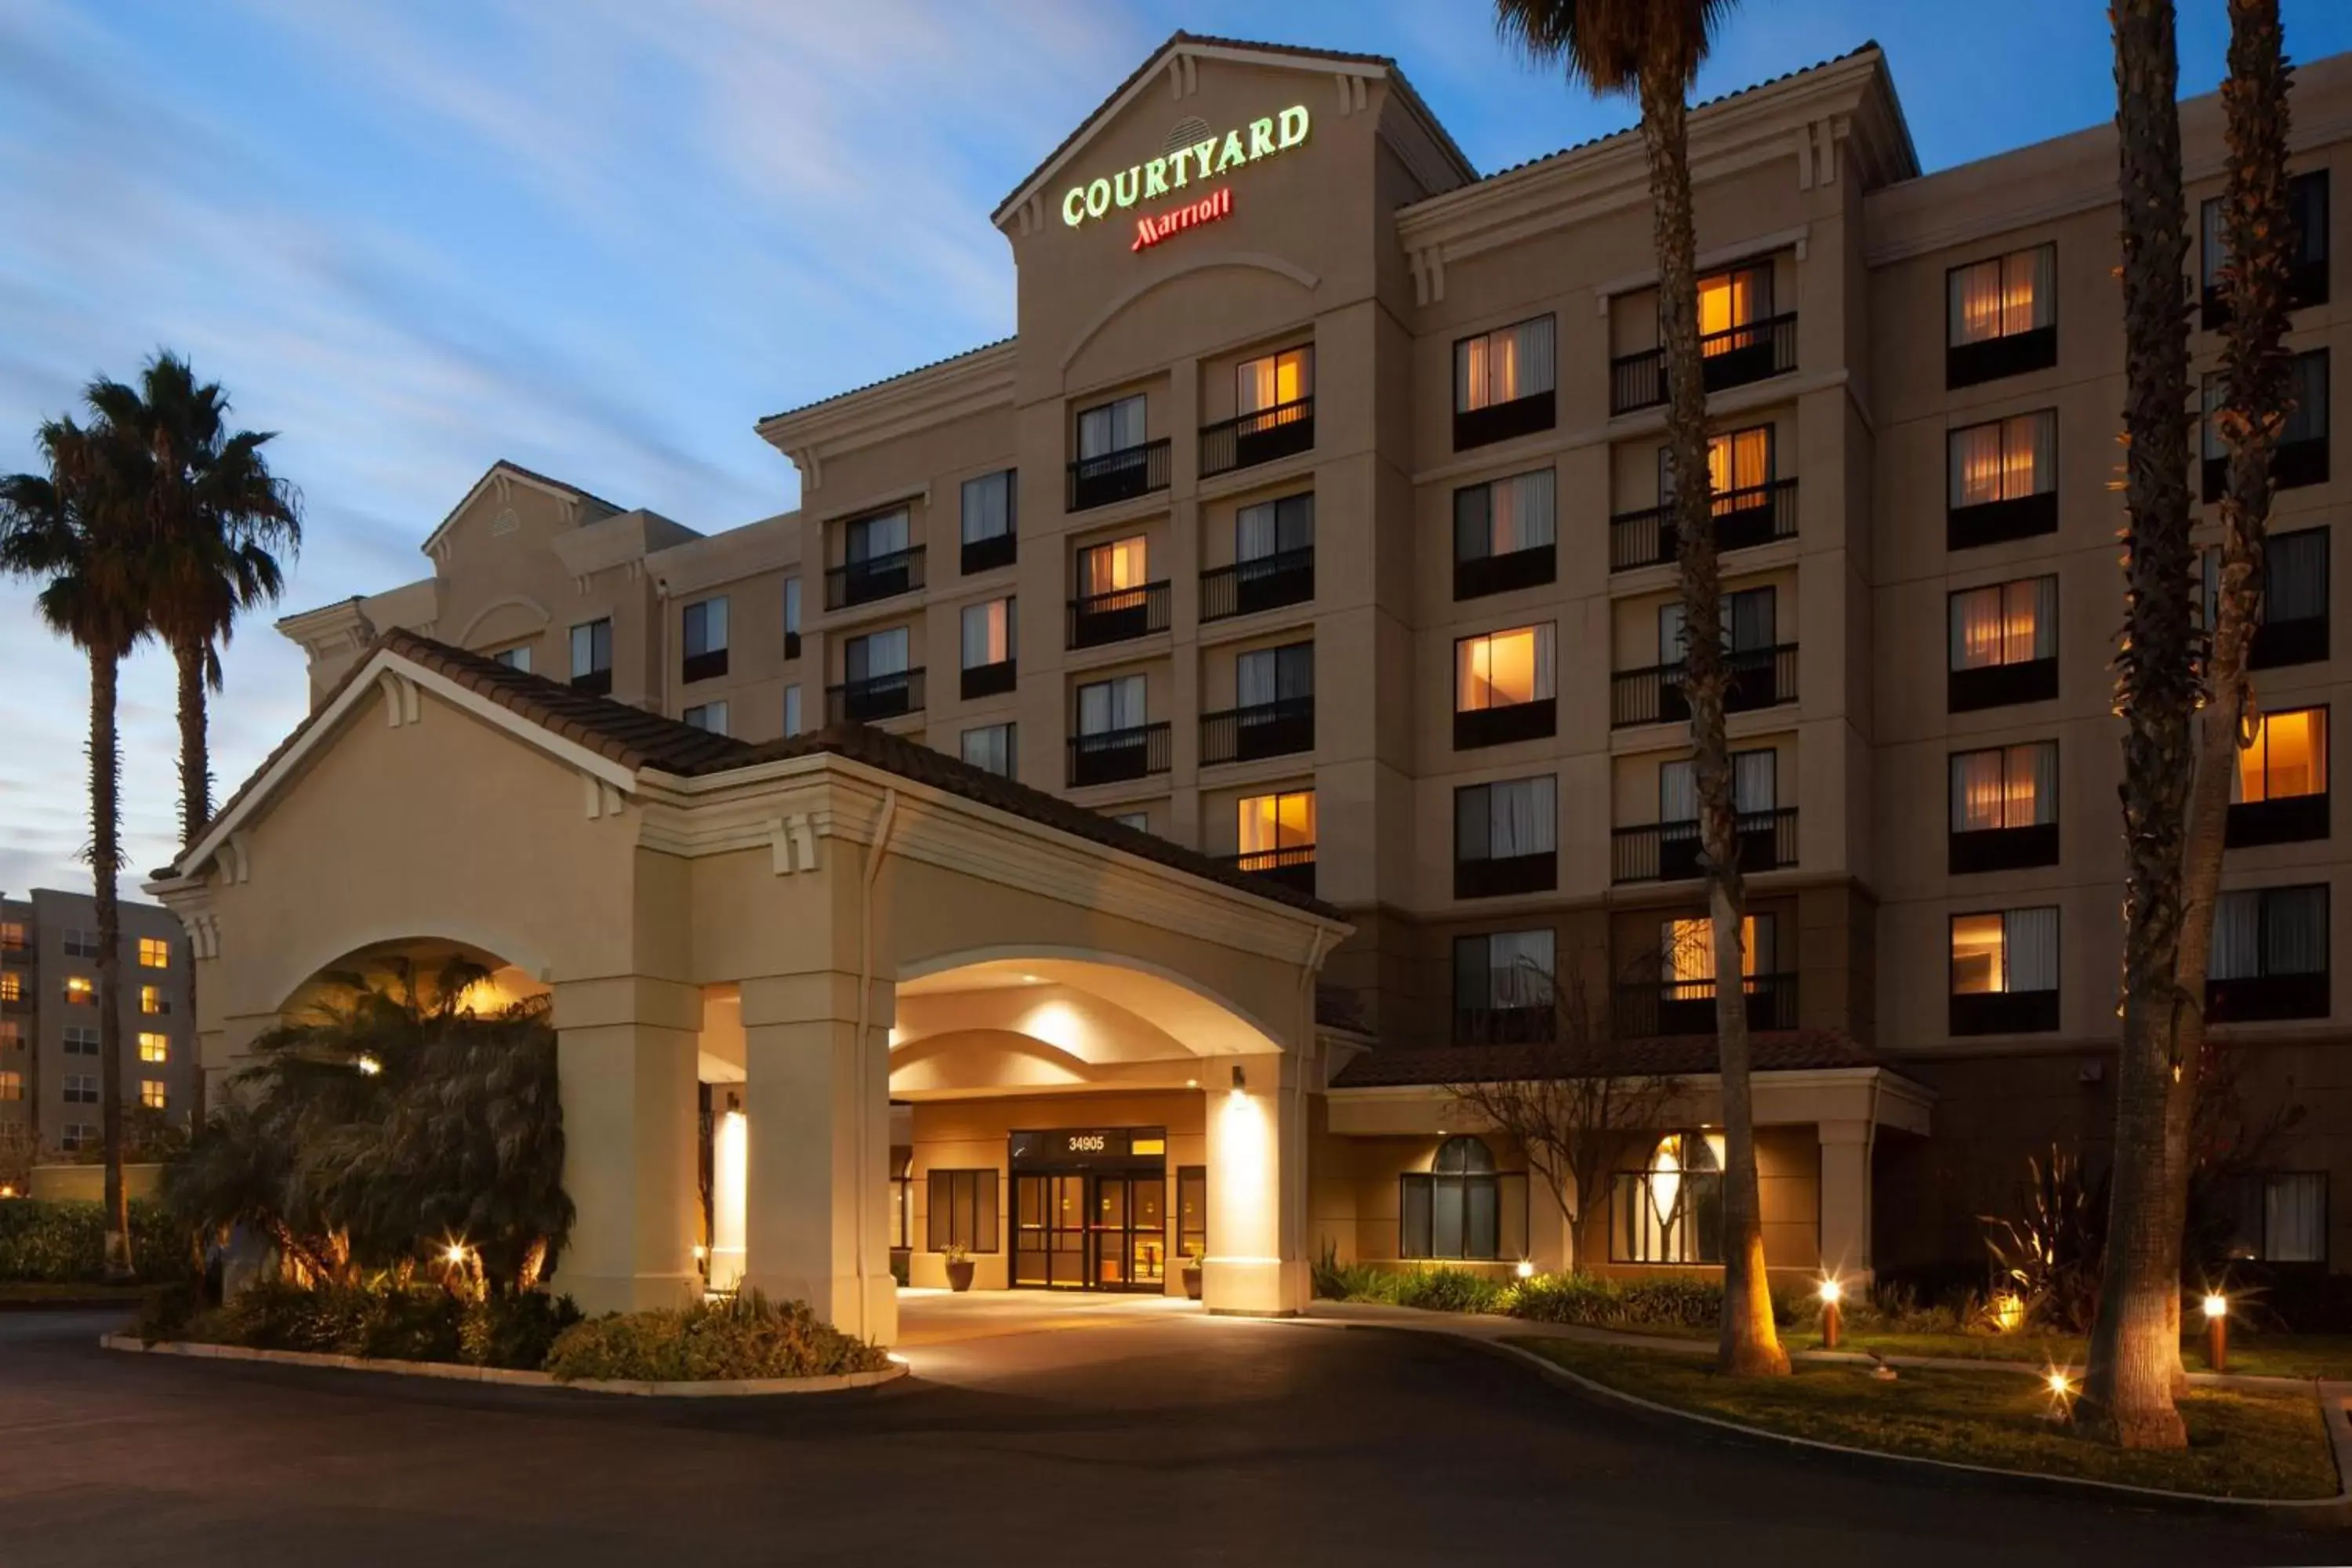 Property Building in Courtyard by Marriott Newark Silicon Valley